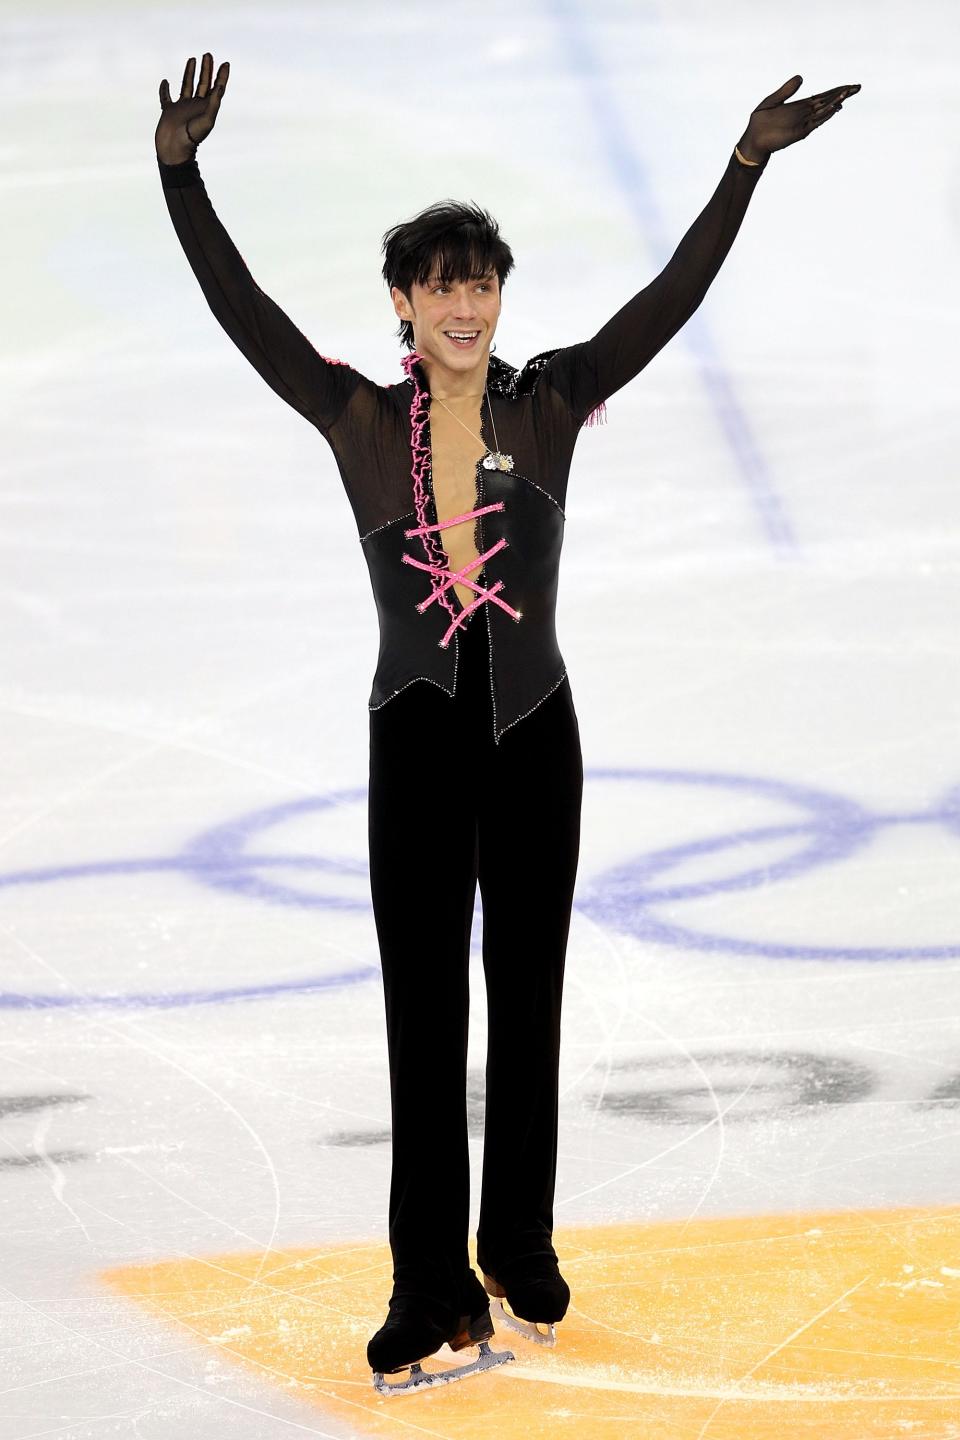 Johnny Weir wearing a corseted top at the olympics in 2010.